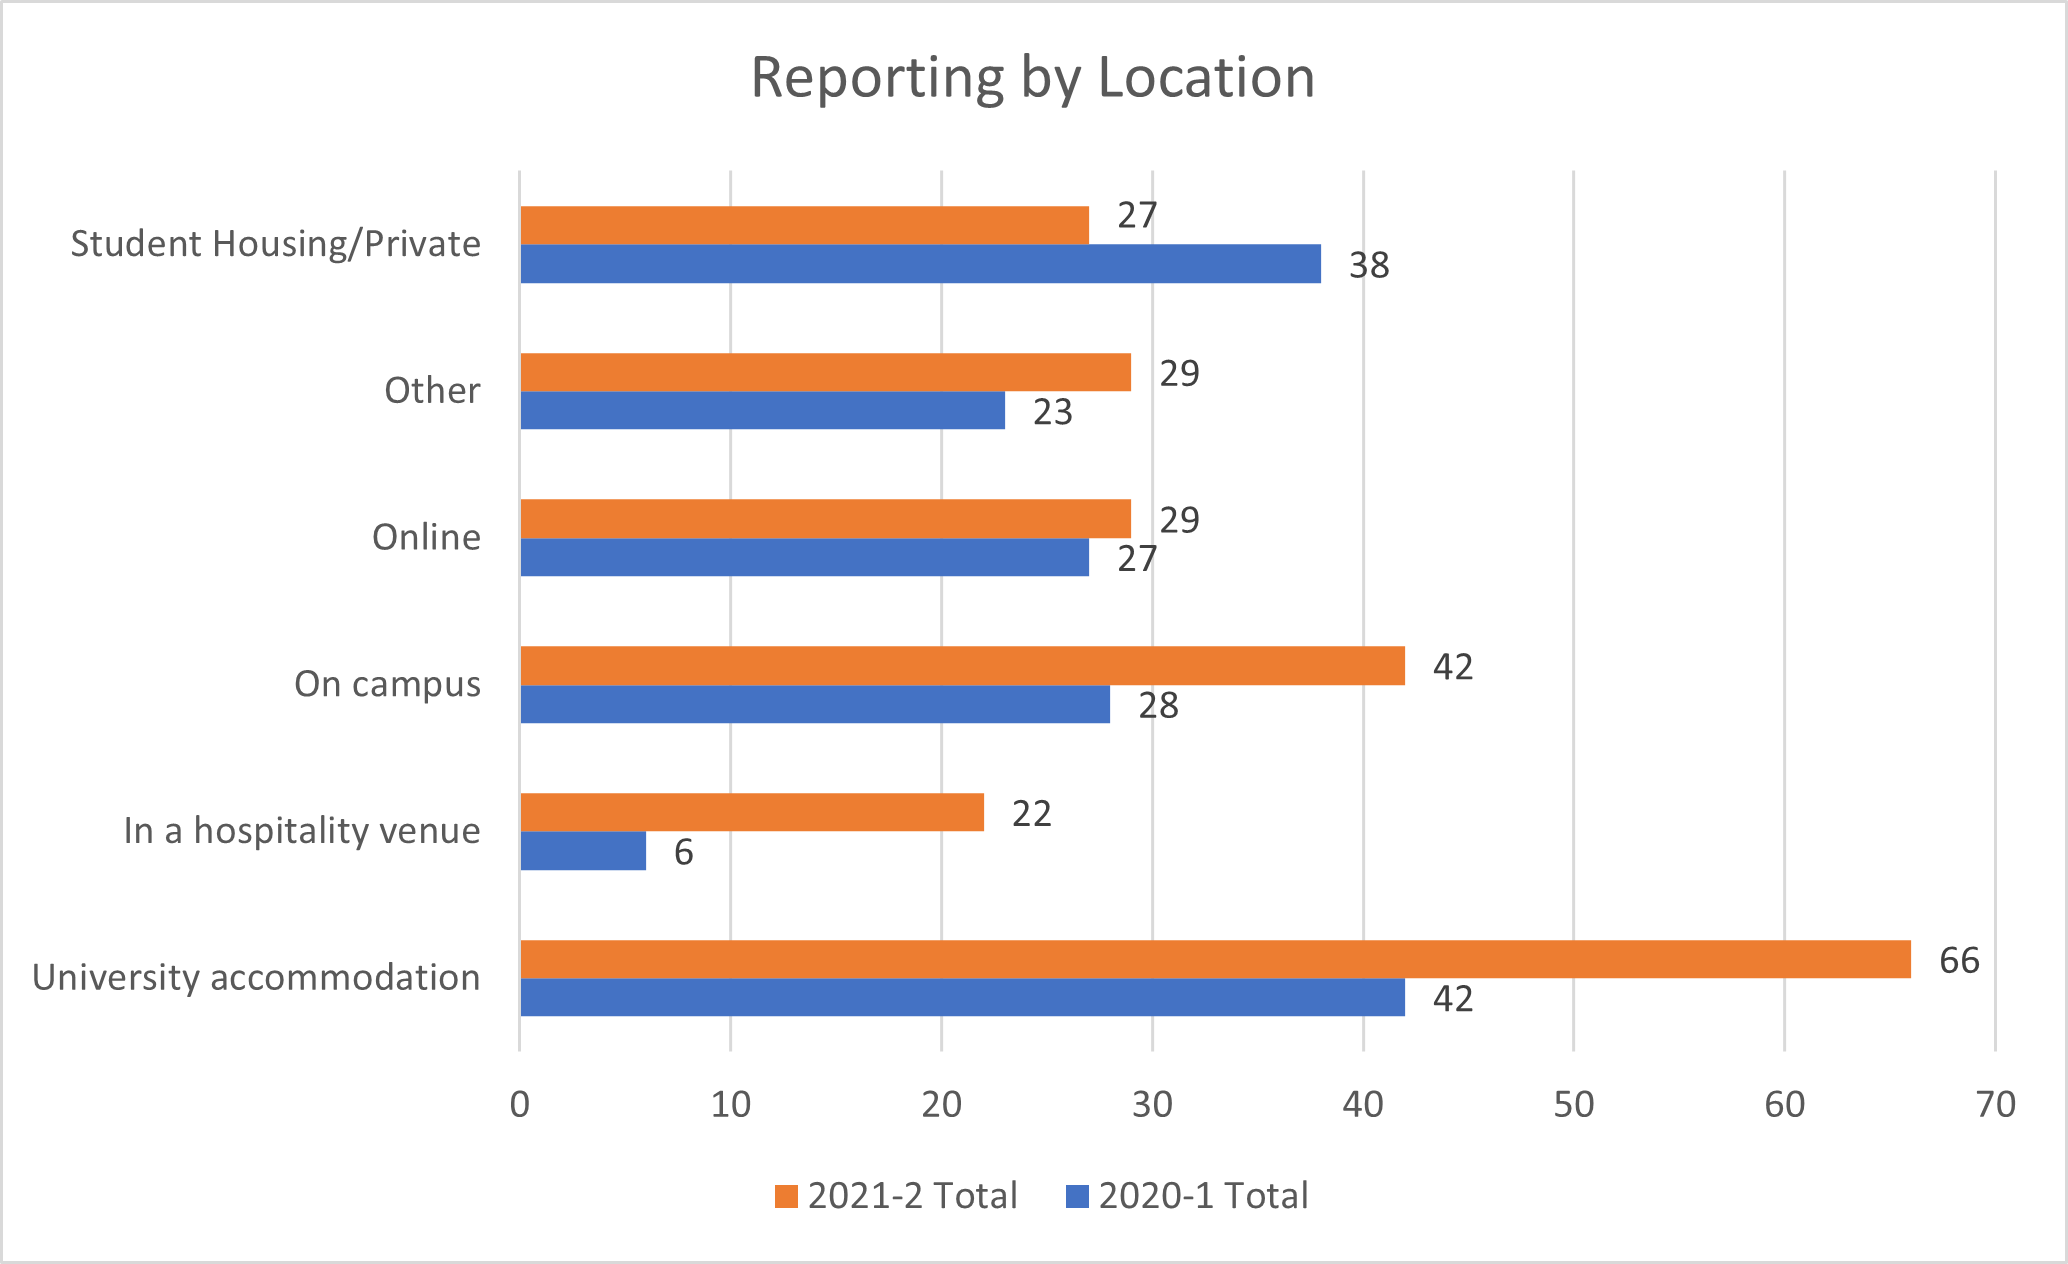 Data on reporting by location